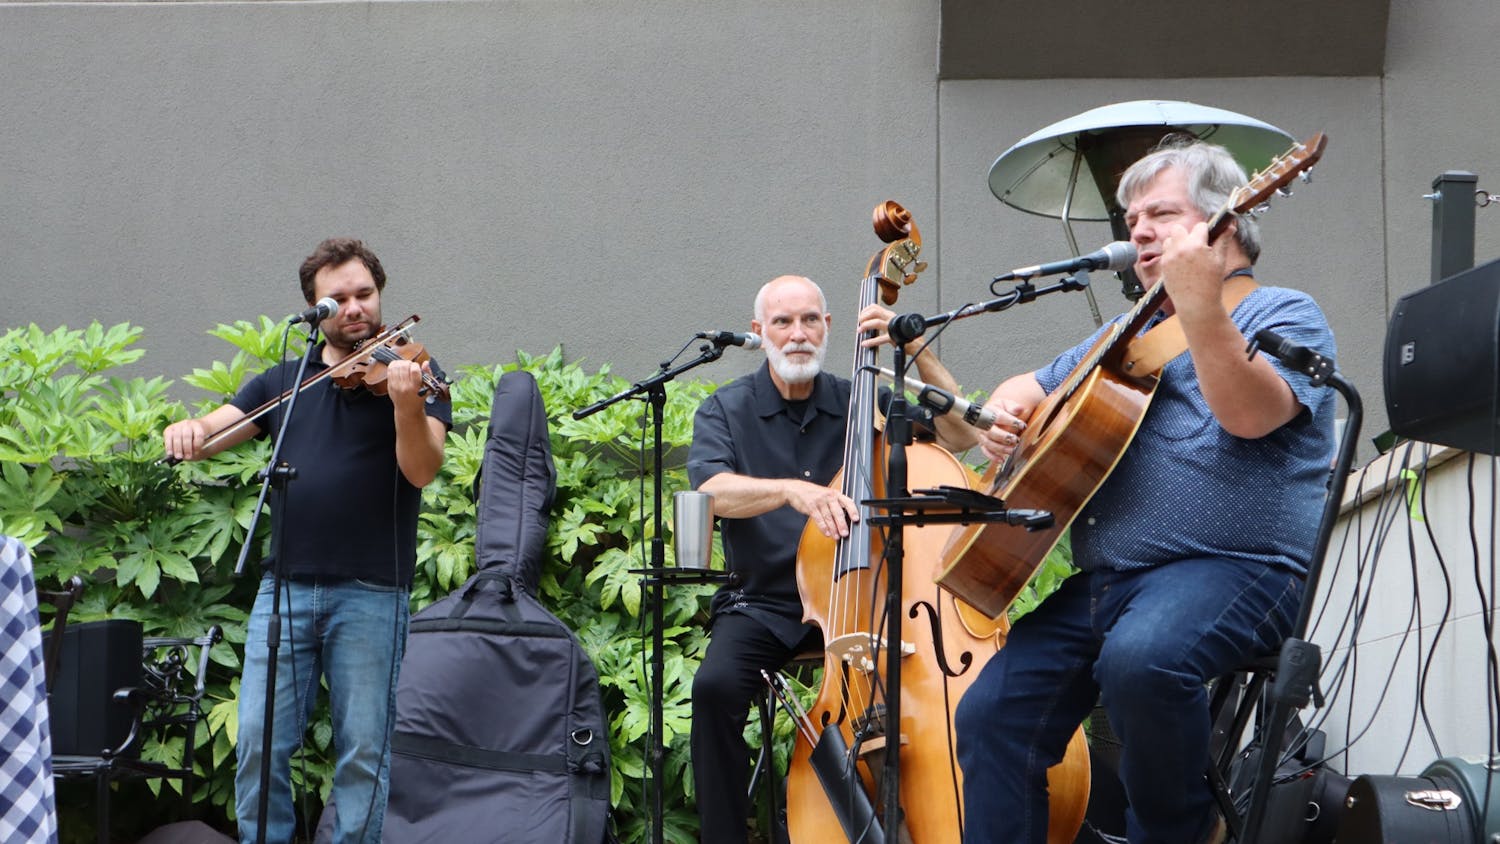 The Randy Lucas Trio performs bluegrass jazz at Bourbon Restaurant on May 26, 2022. The performance is a part of the "Jack-n-Jazz" series occurring every Thursday until the end of June.&nbsp;